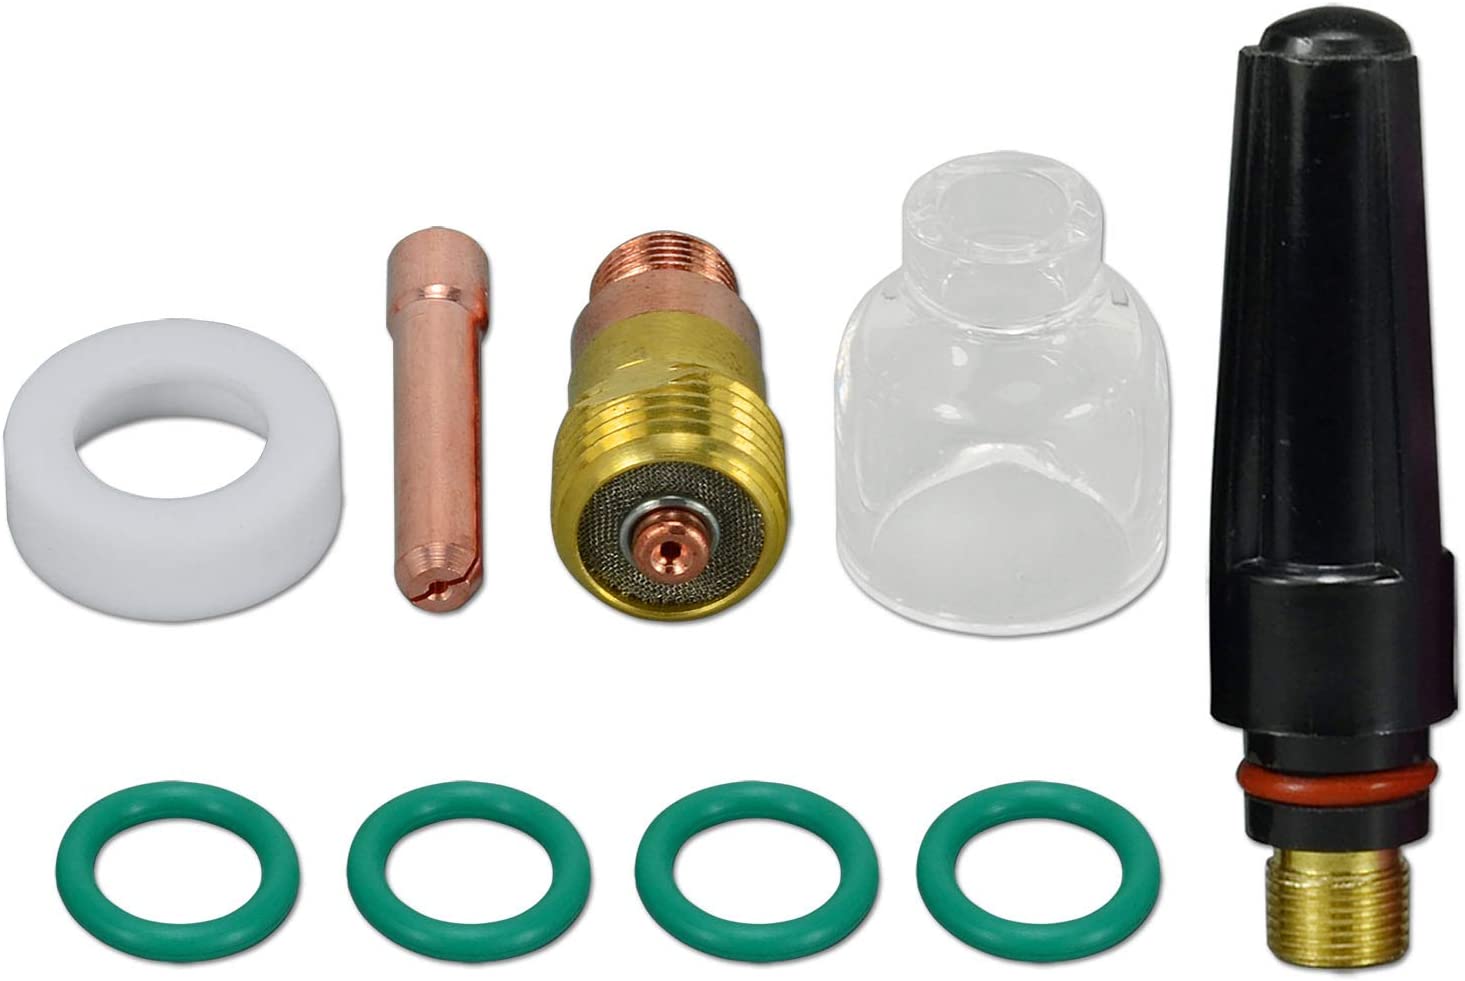 TIG Stubby Gas Lens Collet Body 17GL040 10N22S(0.040” & 1.0mm) Insulated Cup #5 5/16" Gas lens insulator 17GLG20 57Y03 TIG Back cap Assorted Kit fit SR WP 17 18 26 TIG Welding Torch Accessories 9pcs